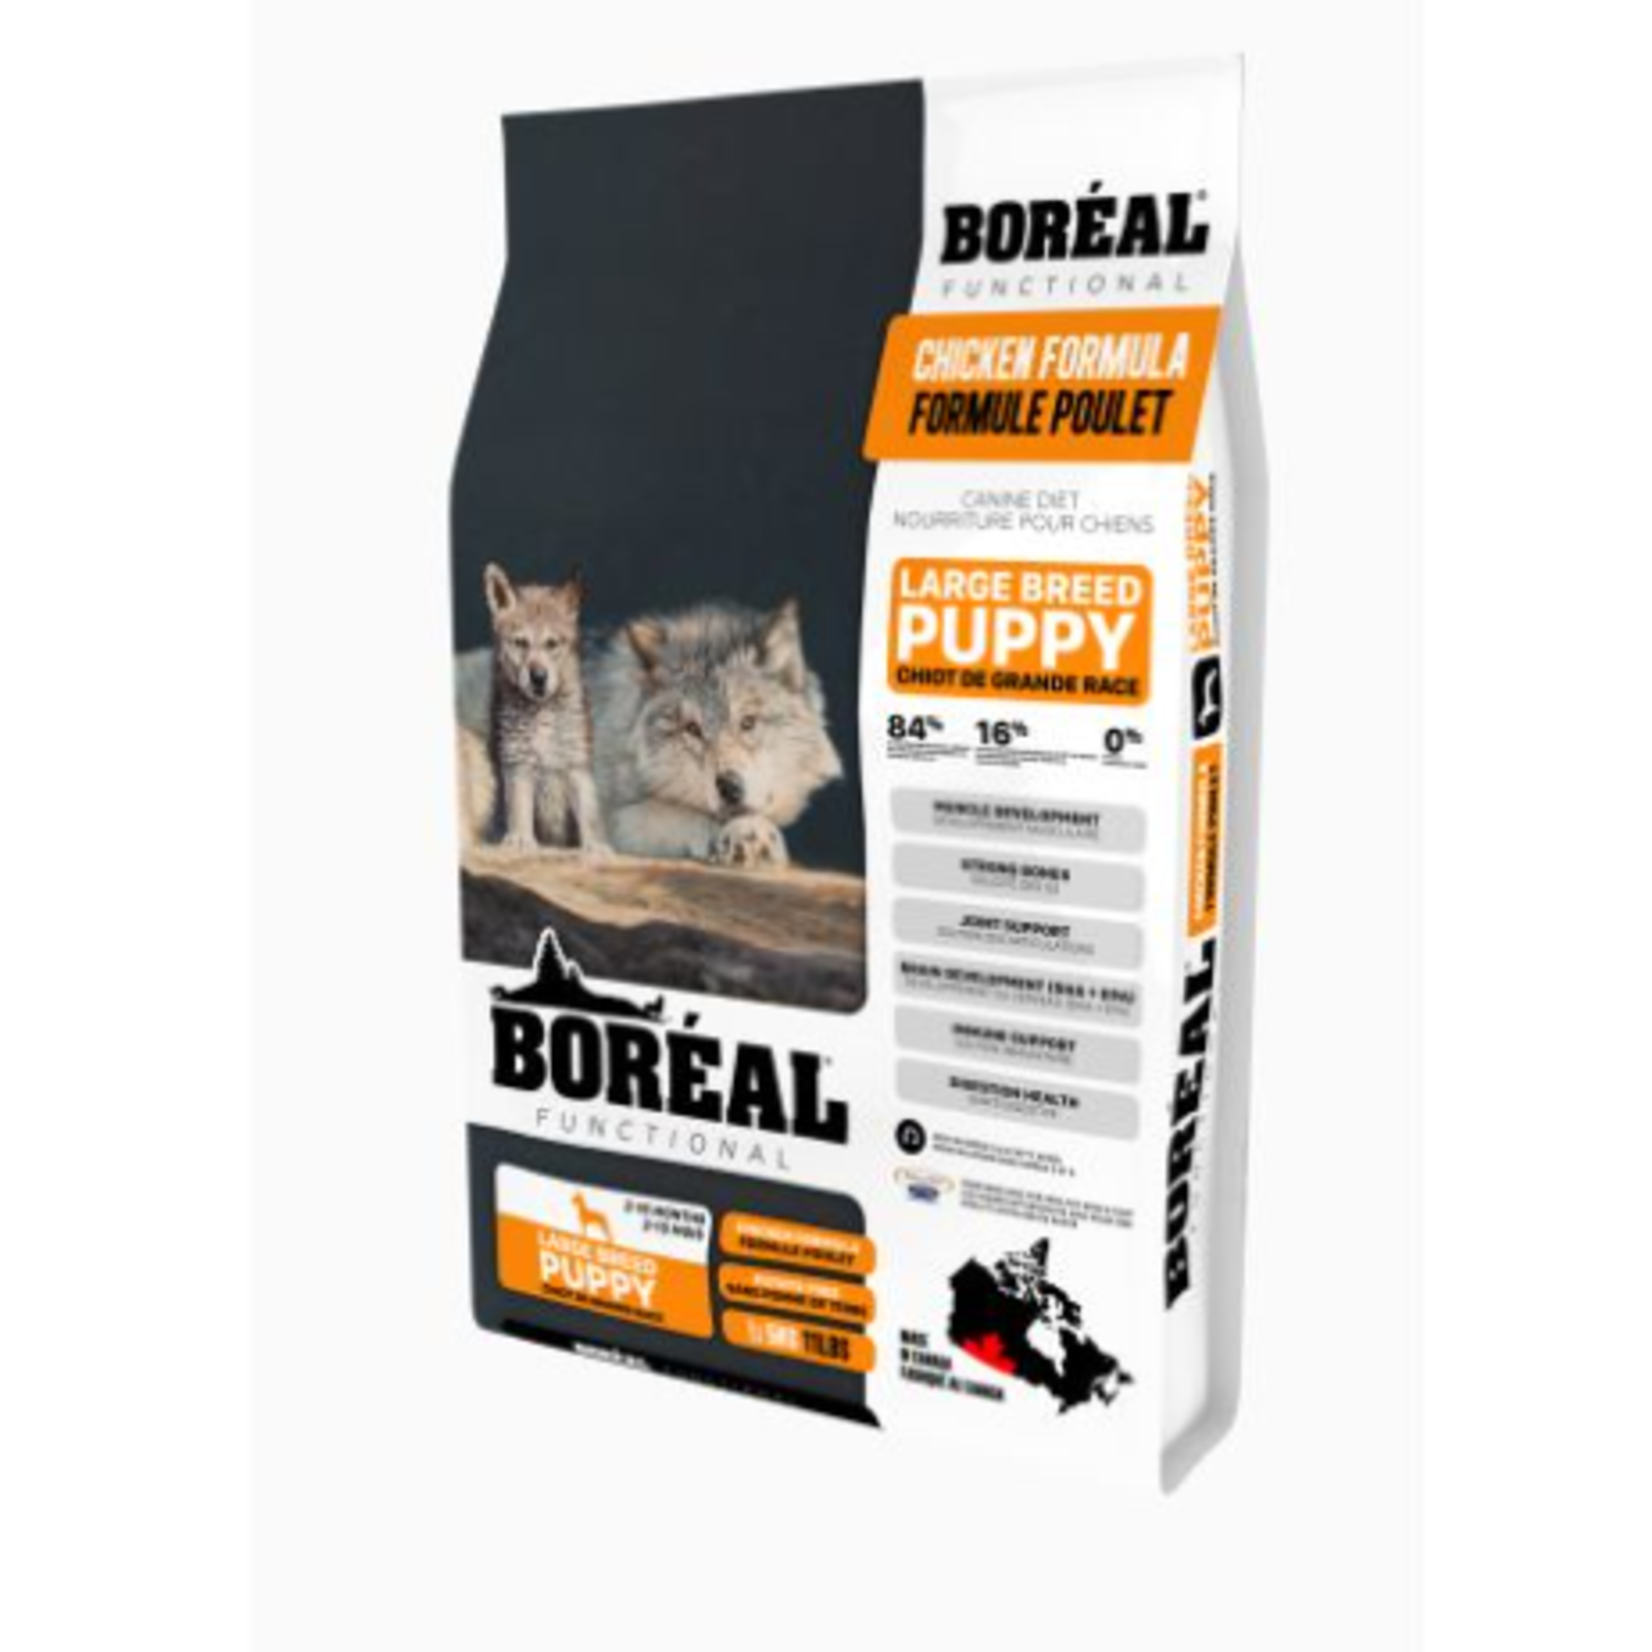 Boréal Functional - Chicken - For Puppy - Large Breed - 5 kg